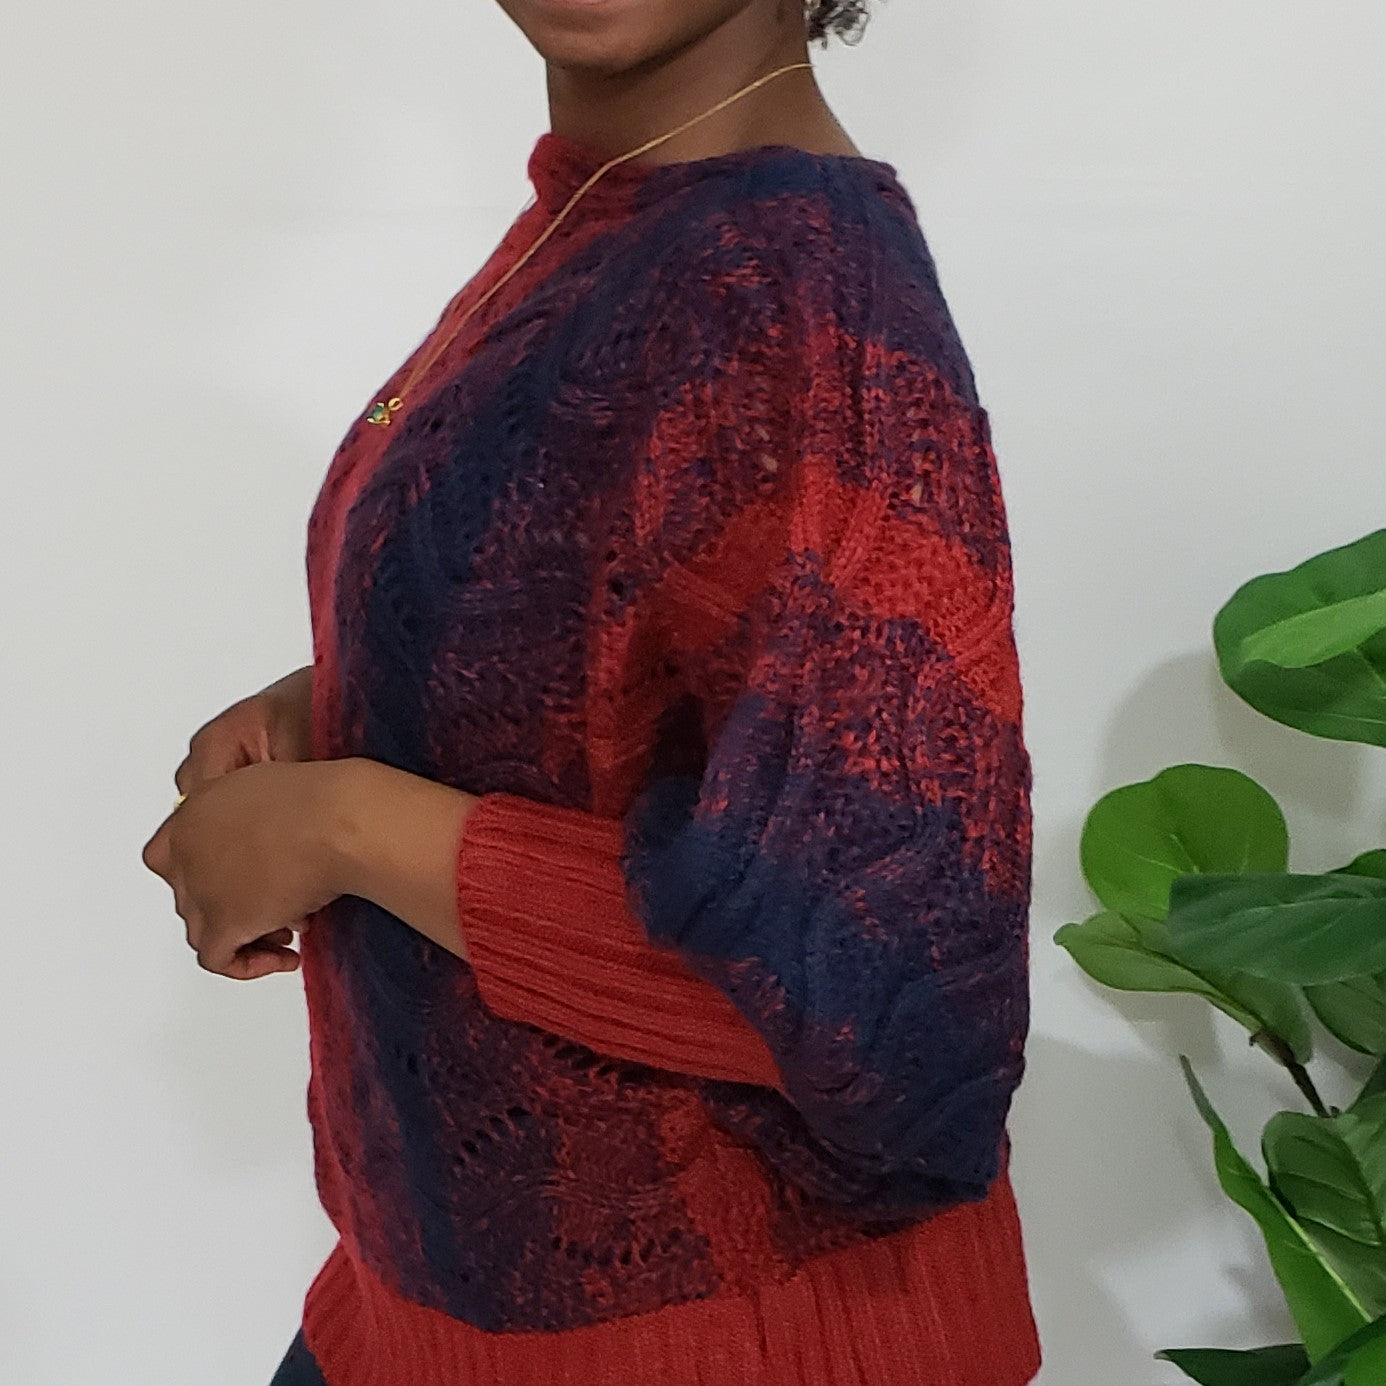 Gabrielle Rich Red & Navy Boatneck Knit Sweater in Plus - Houzz of DVA Boutique